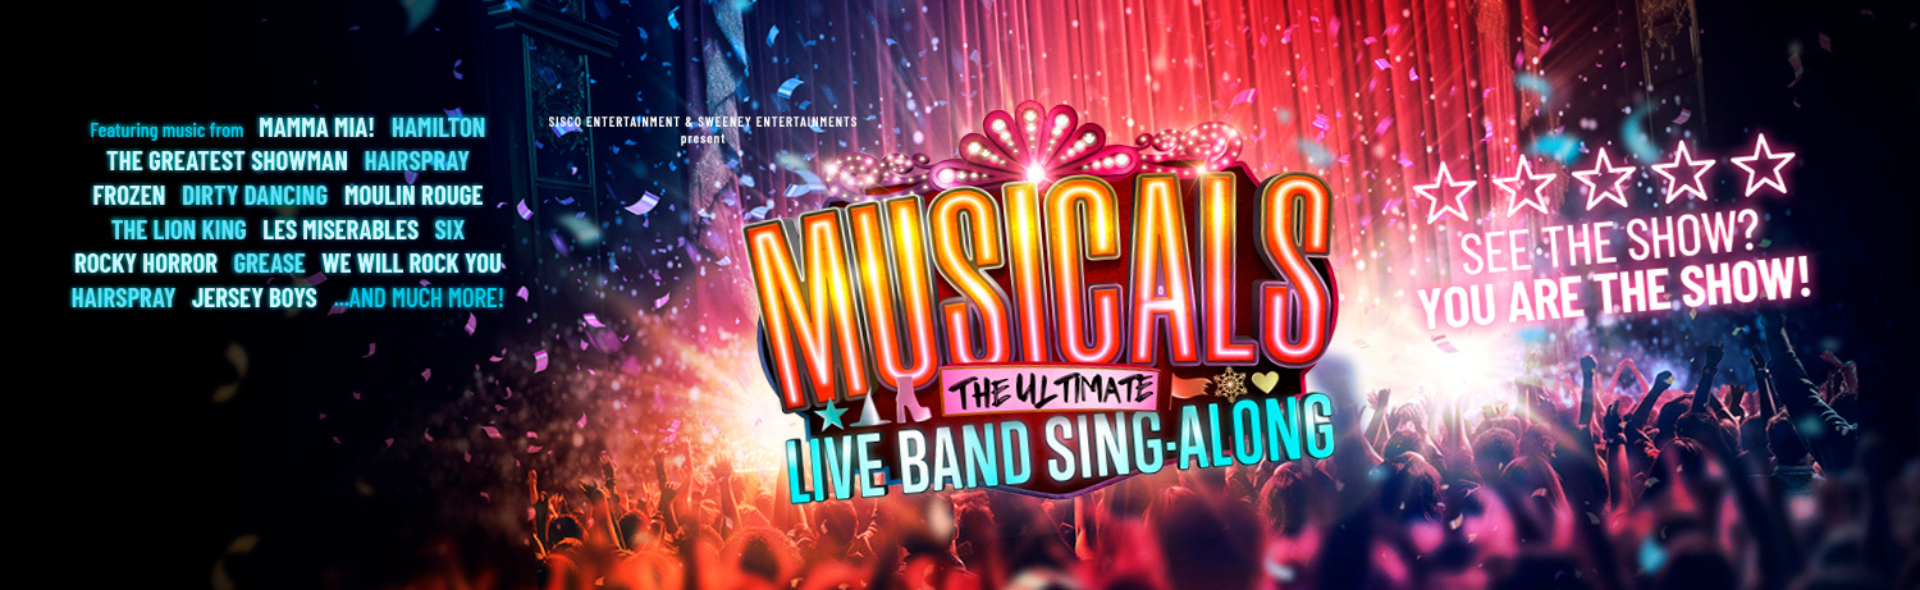 Musicals - The Ultimate Live Band Sing - Along